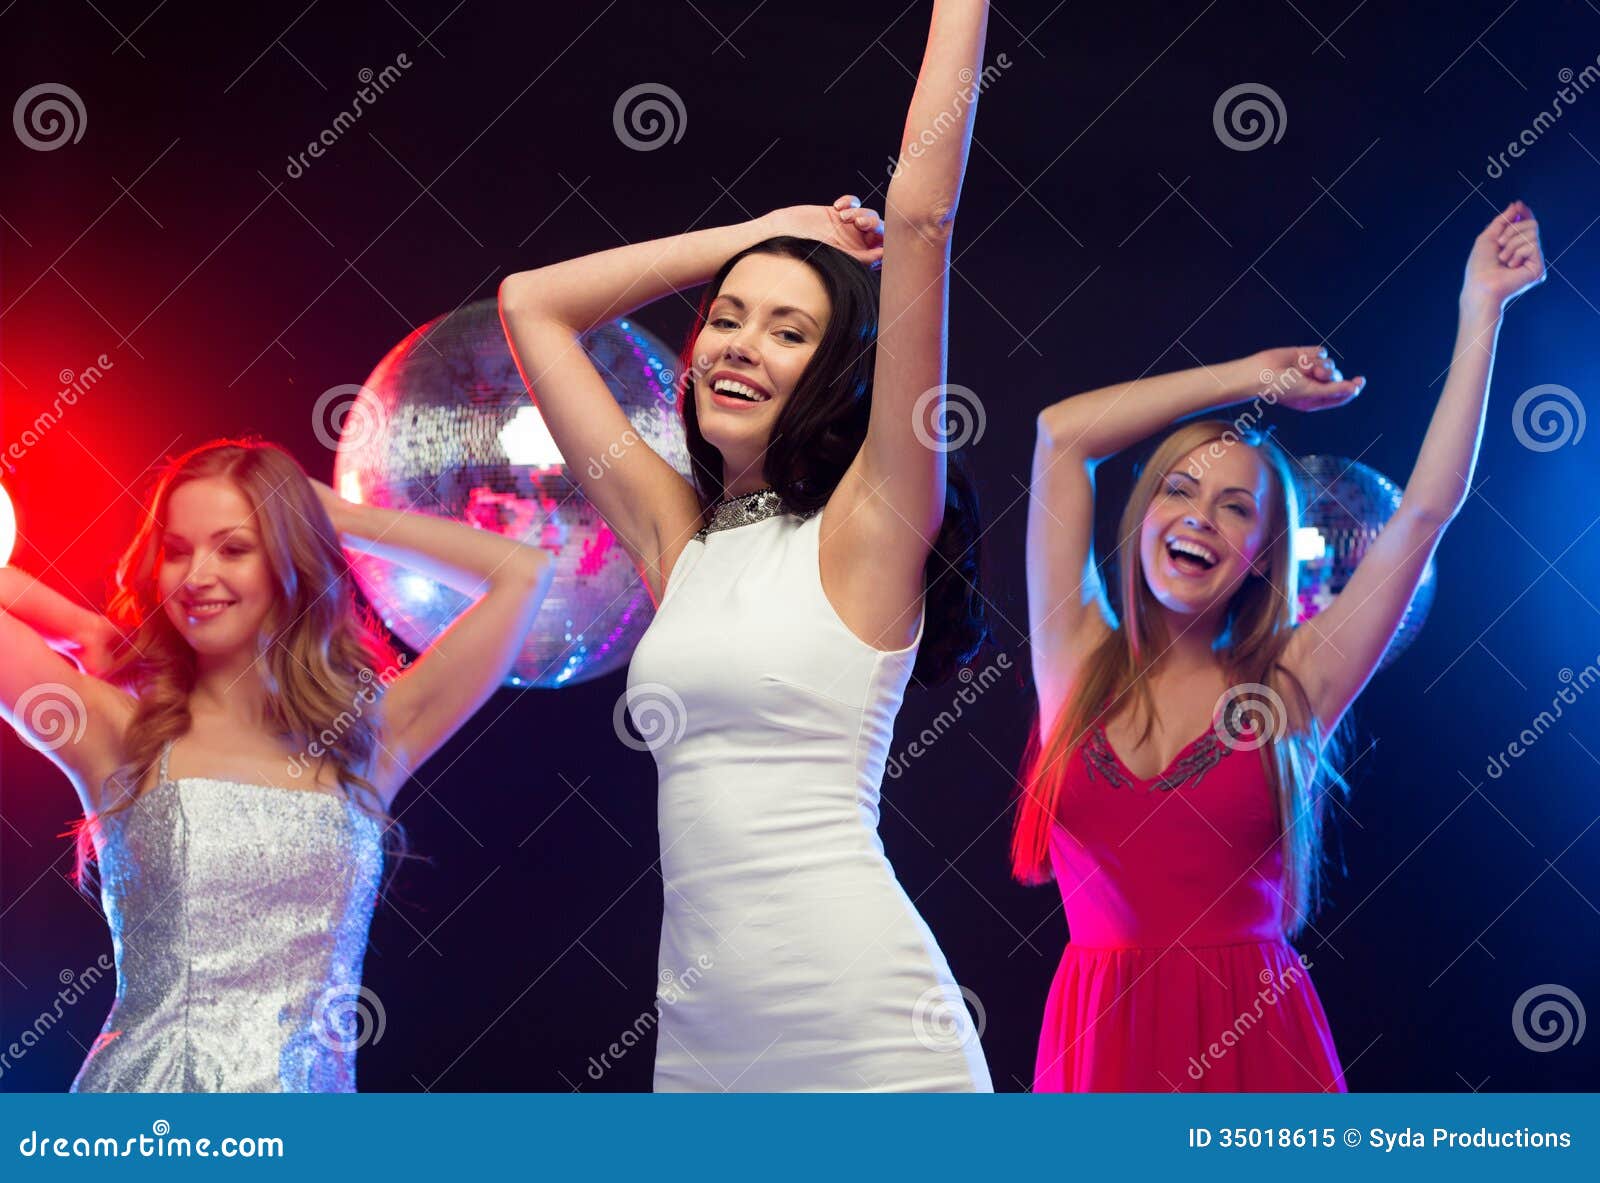 Three Smiling Women Dancing in the Club Stock Image - Image of high ...